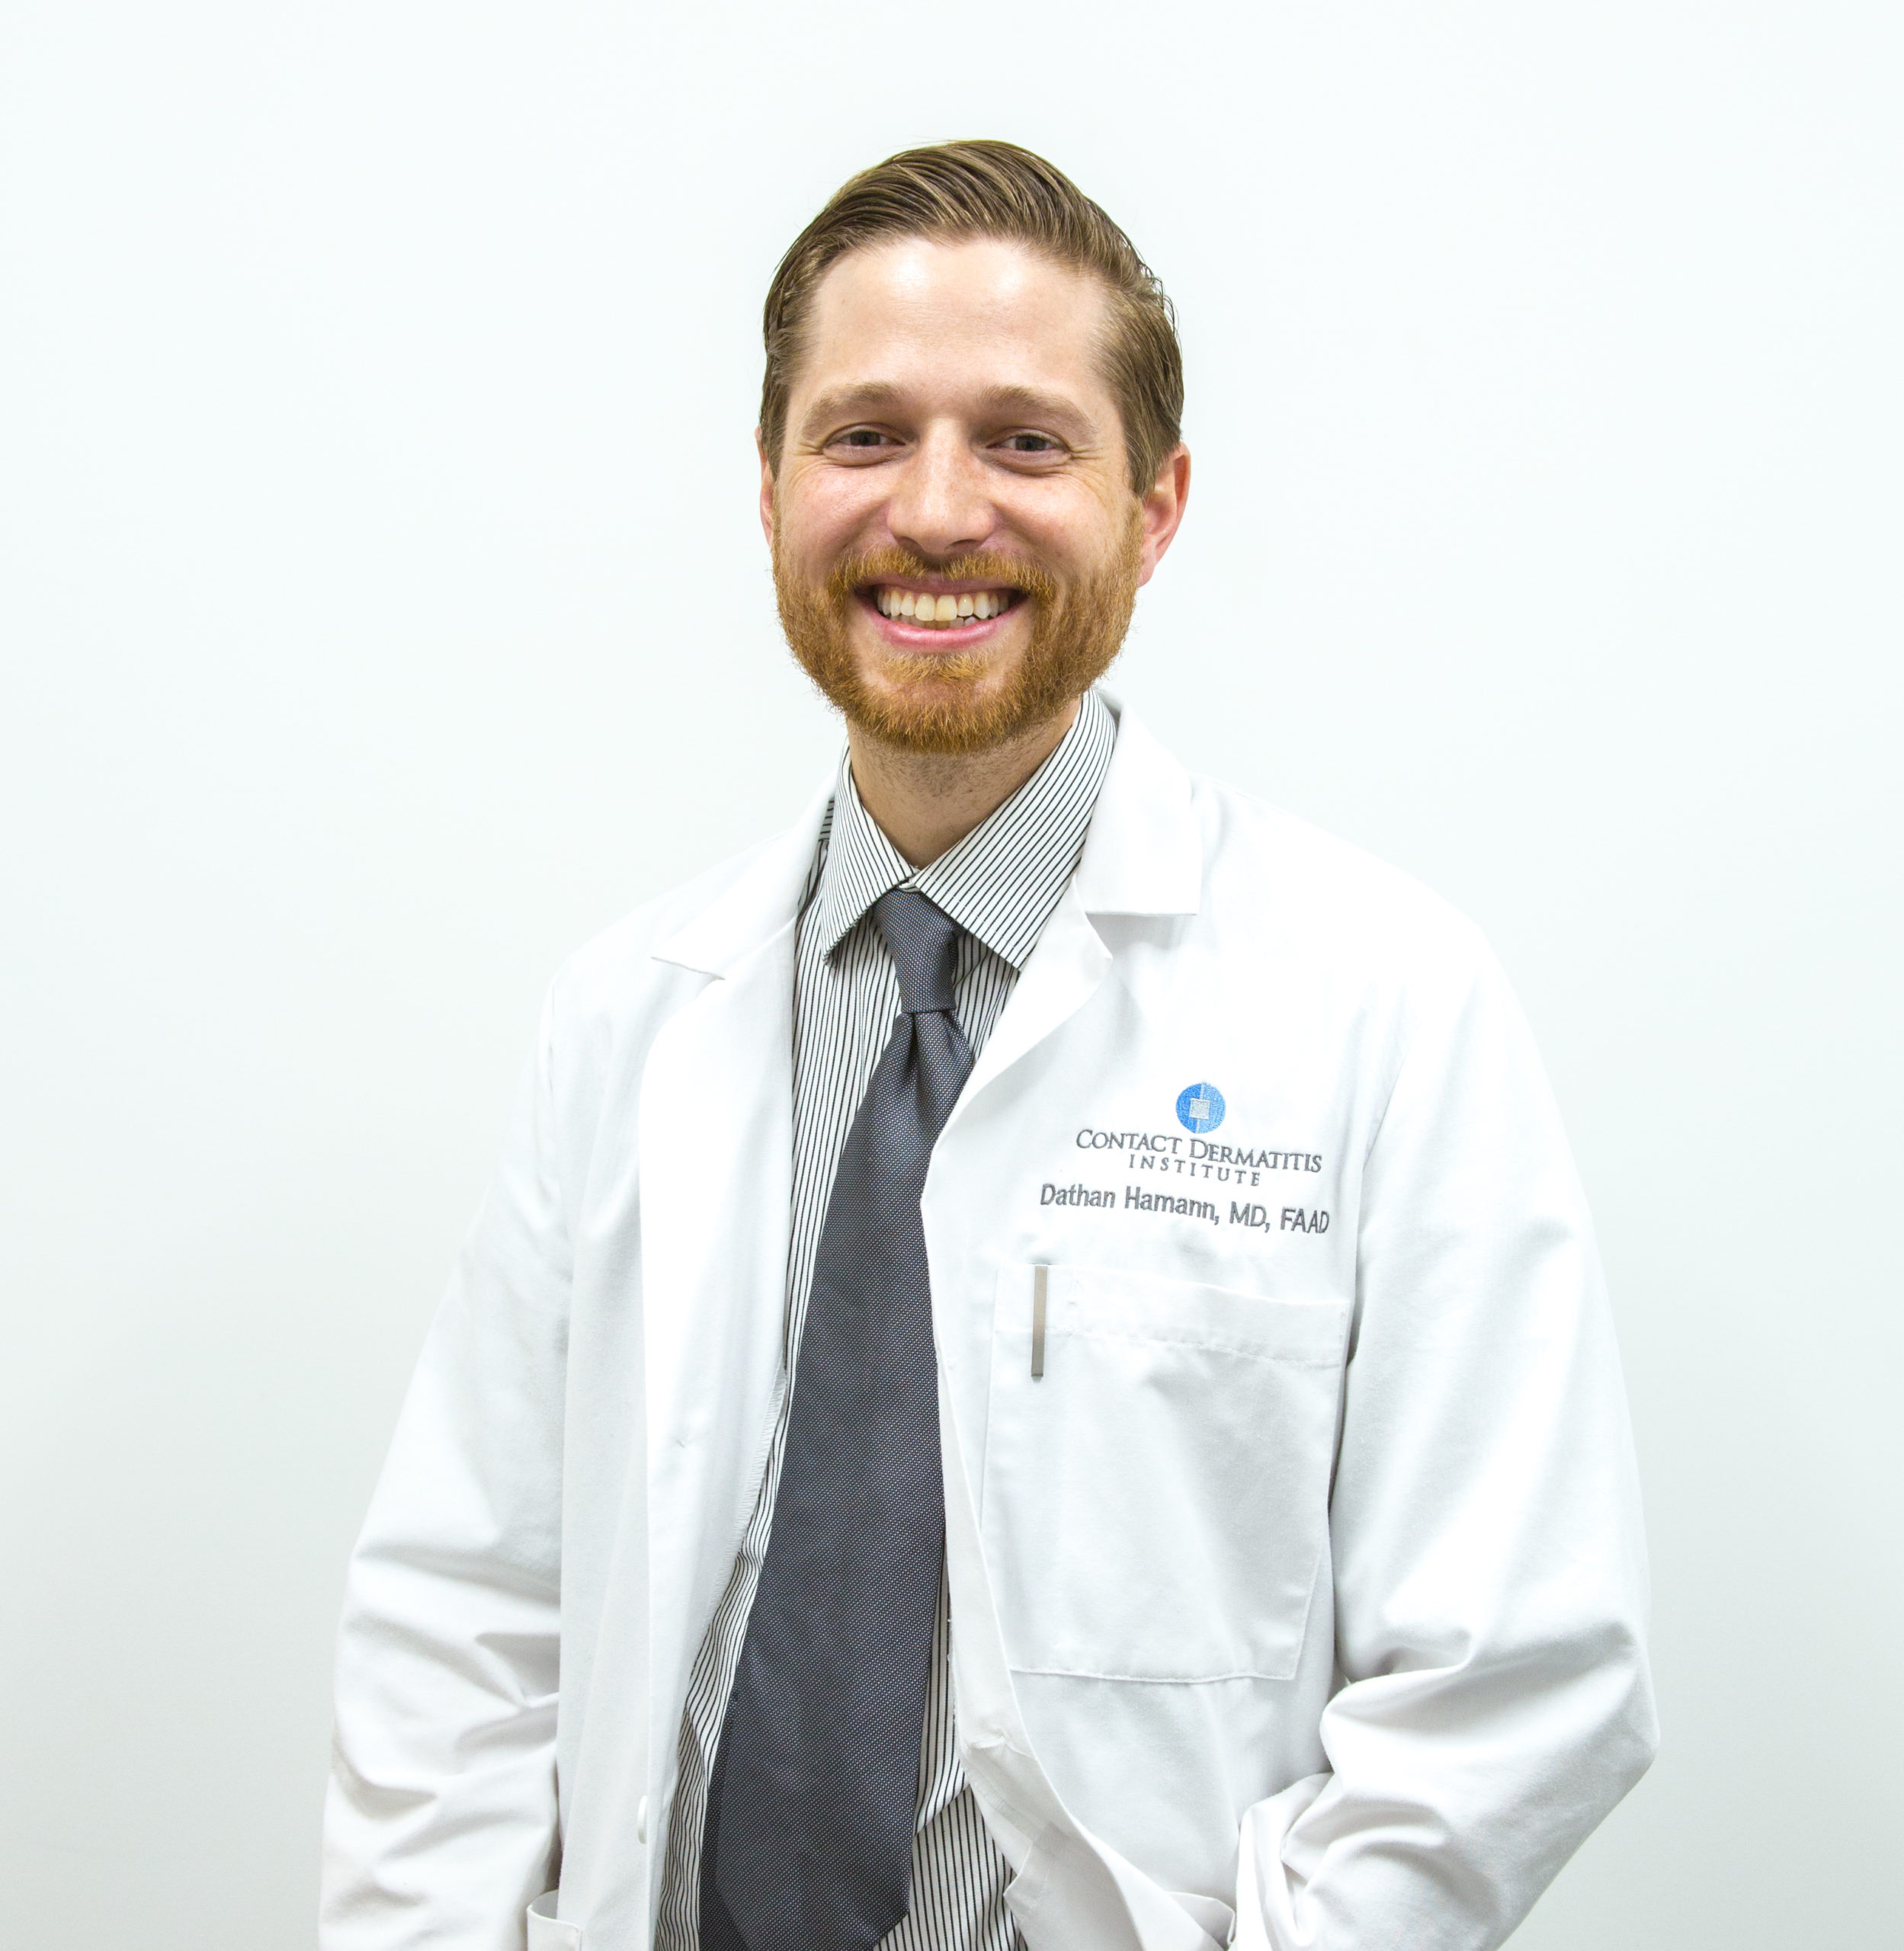 Dr. Dathan Hamann, Contact Dermatitis Institute’s Medical Director